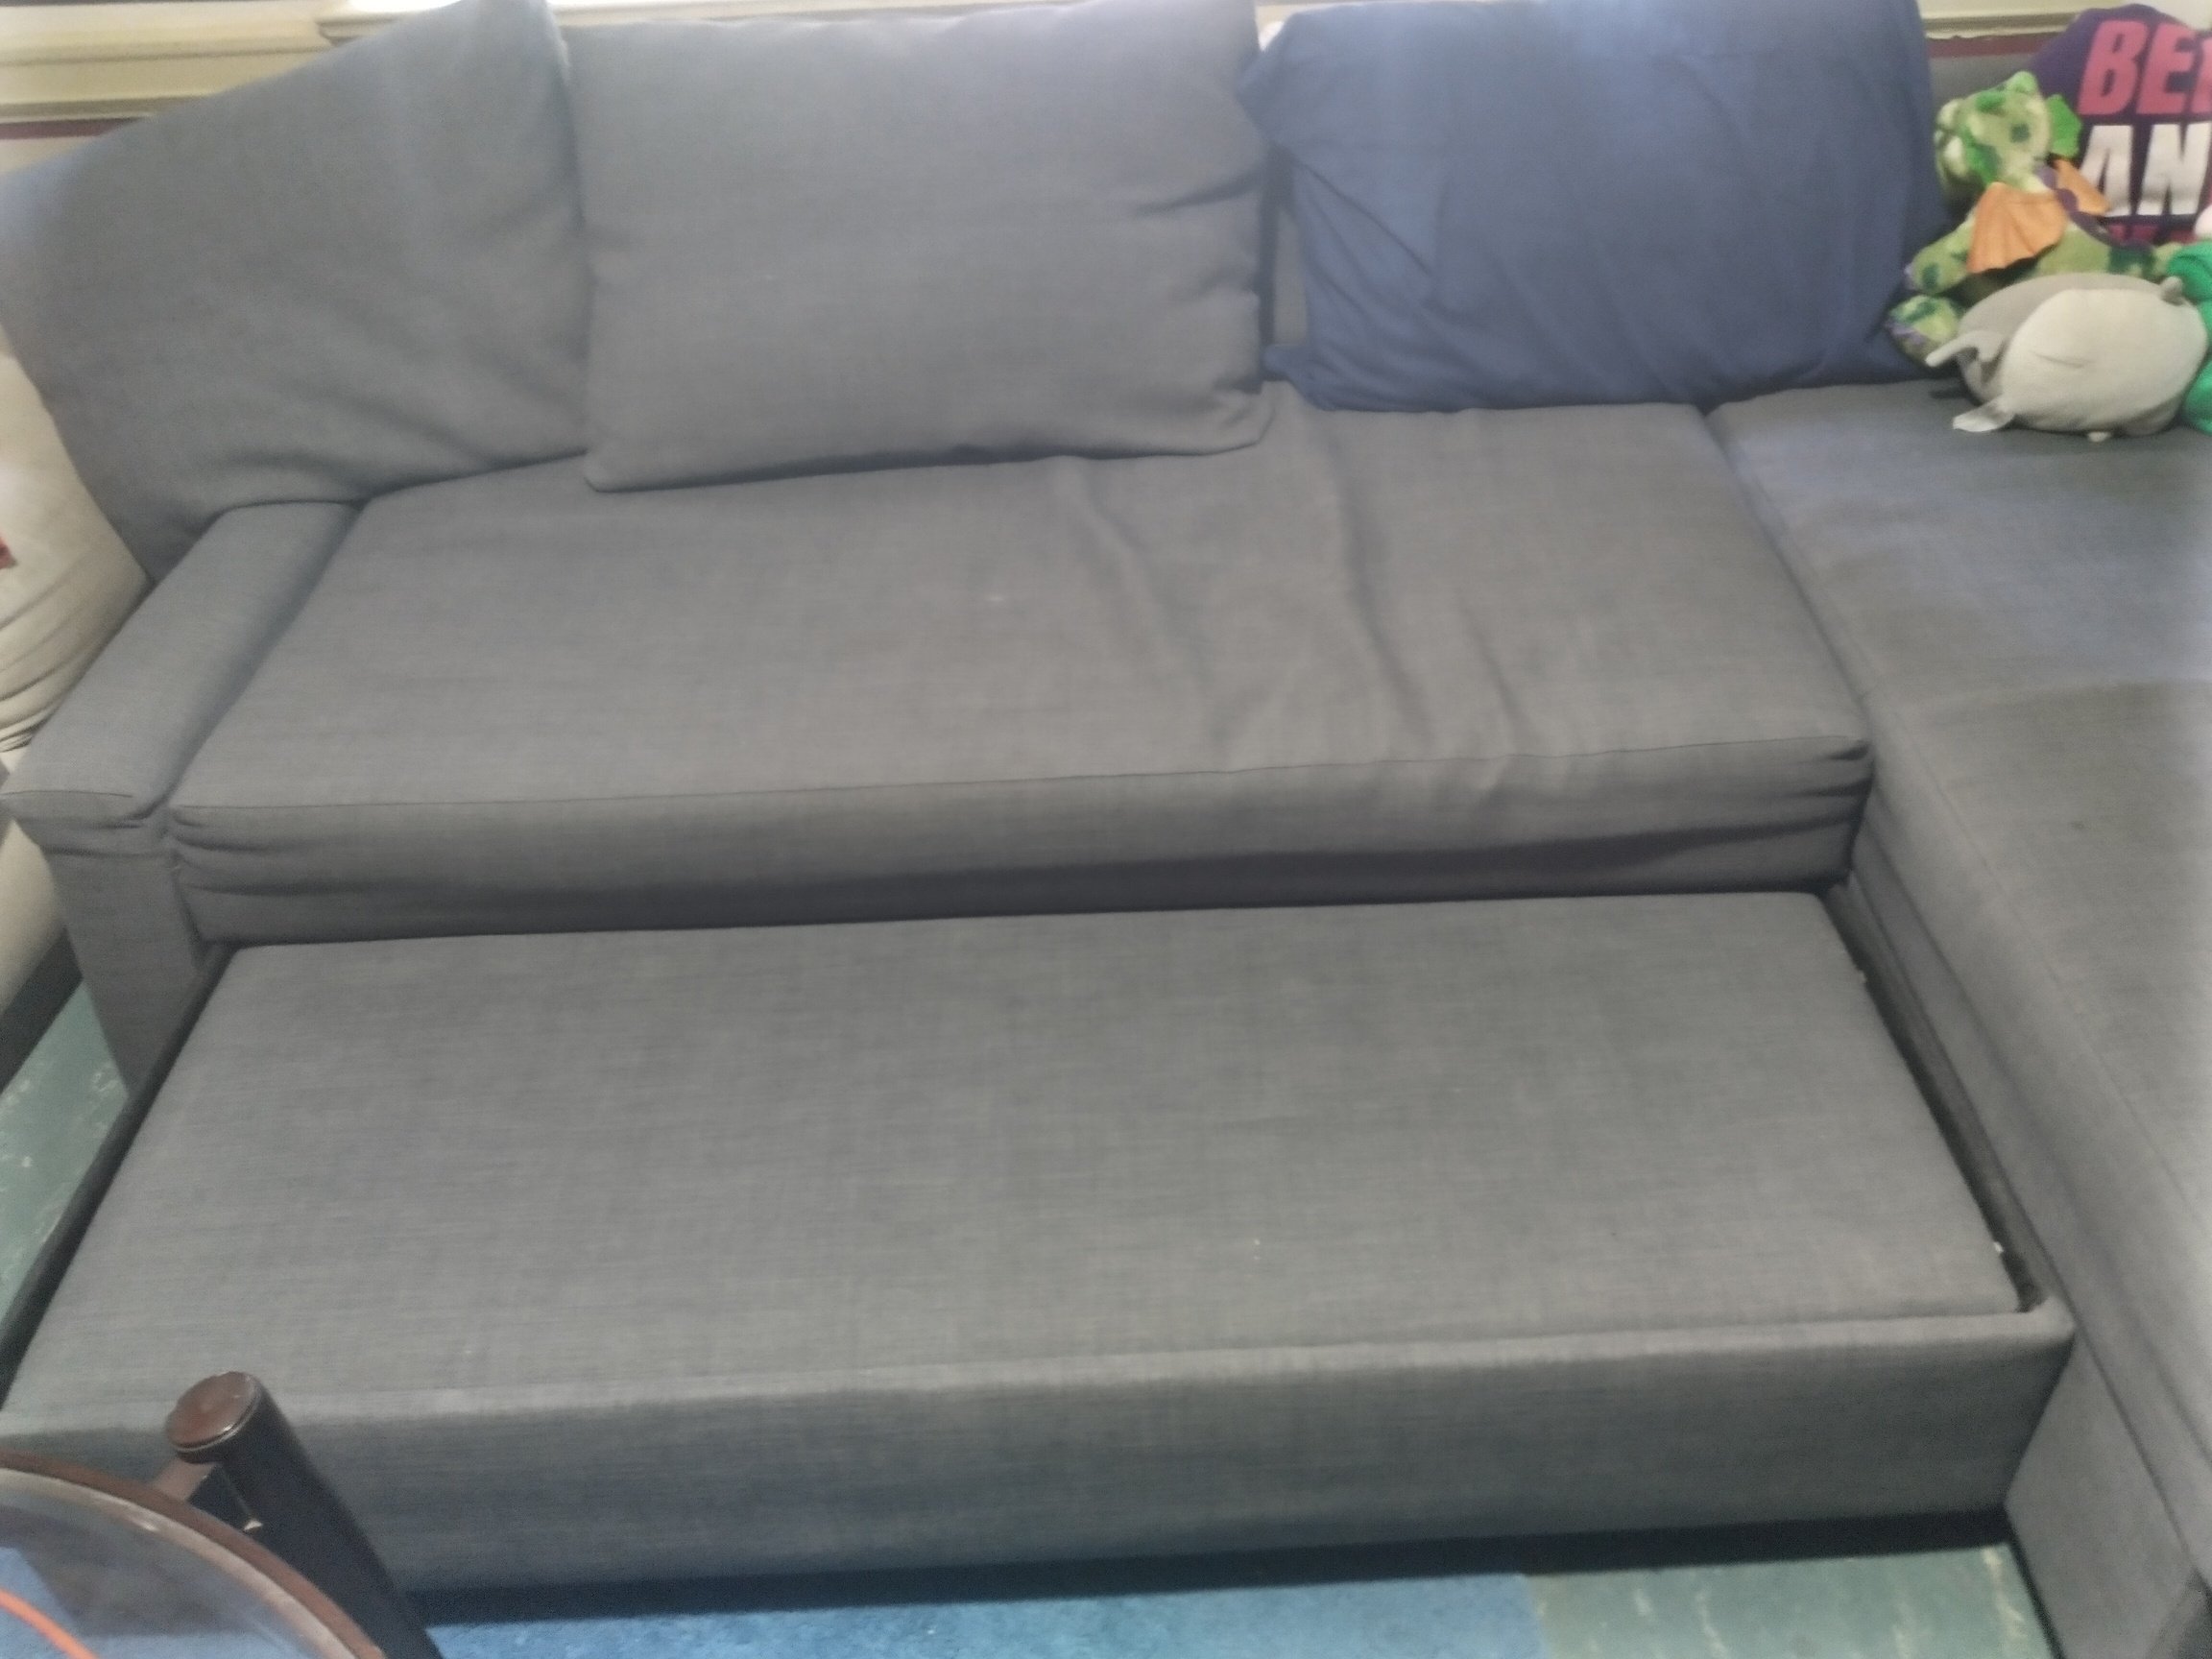 the gray couch with the bottom extended